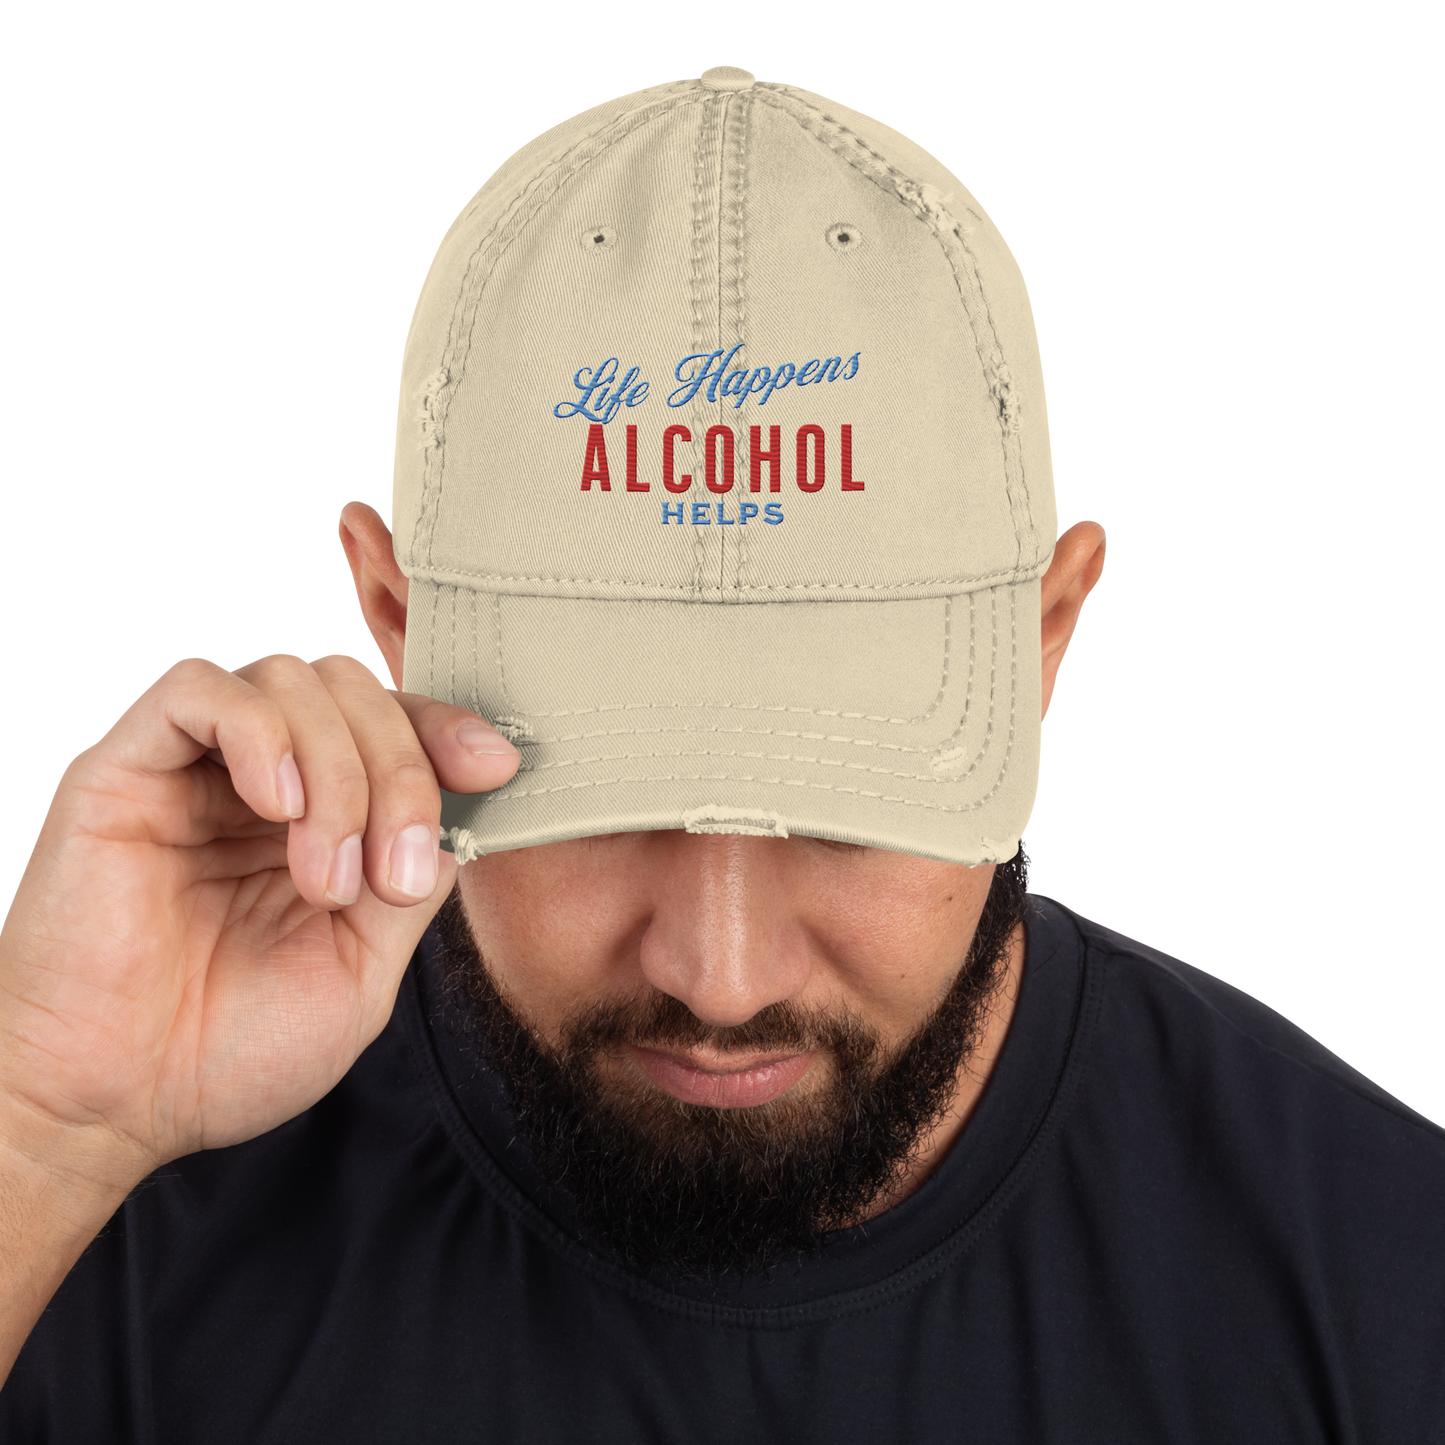 Life Happens Alcohol Helps Distressed Dad Hat